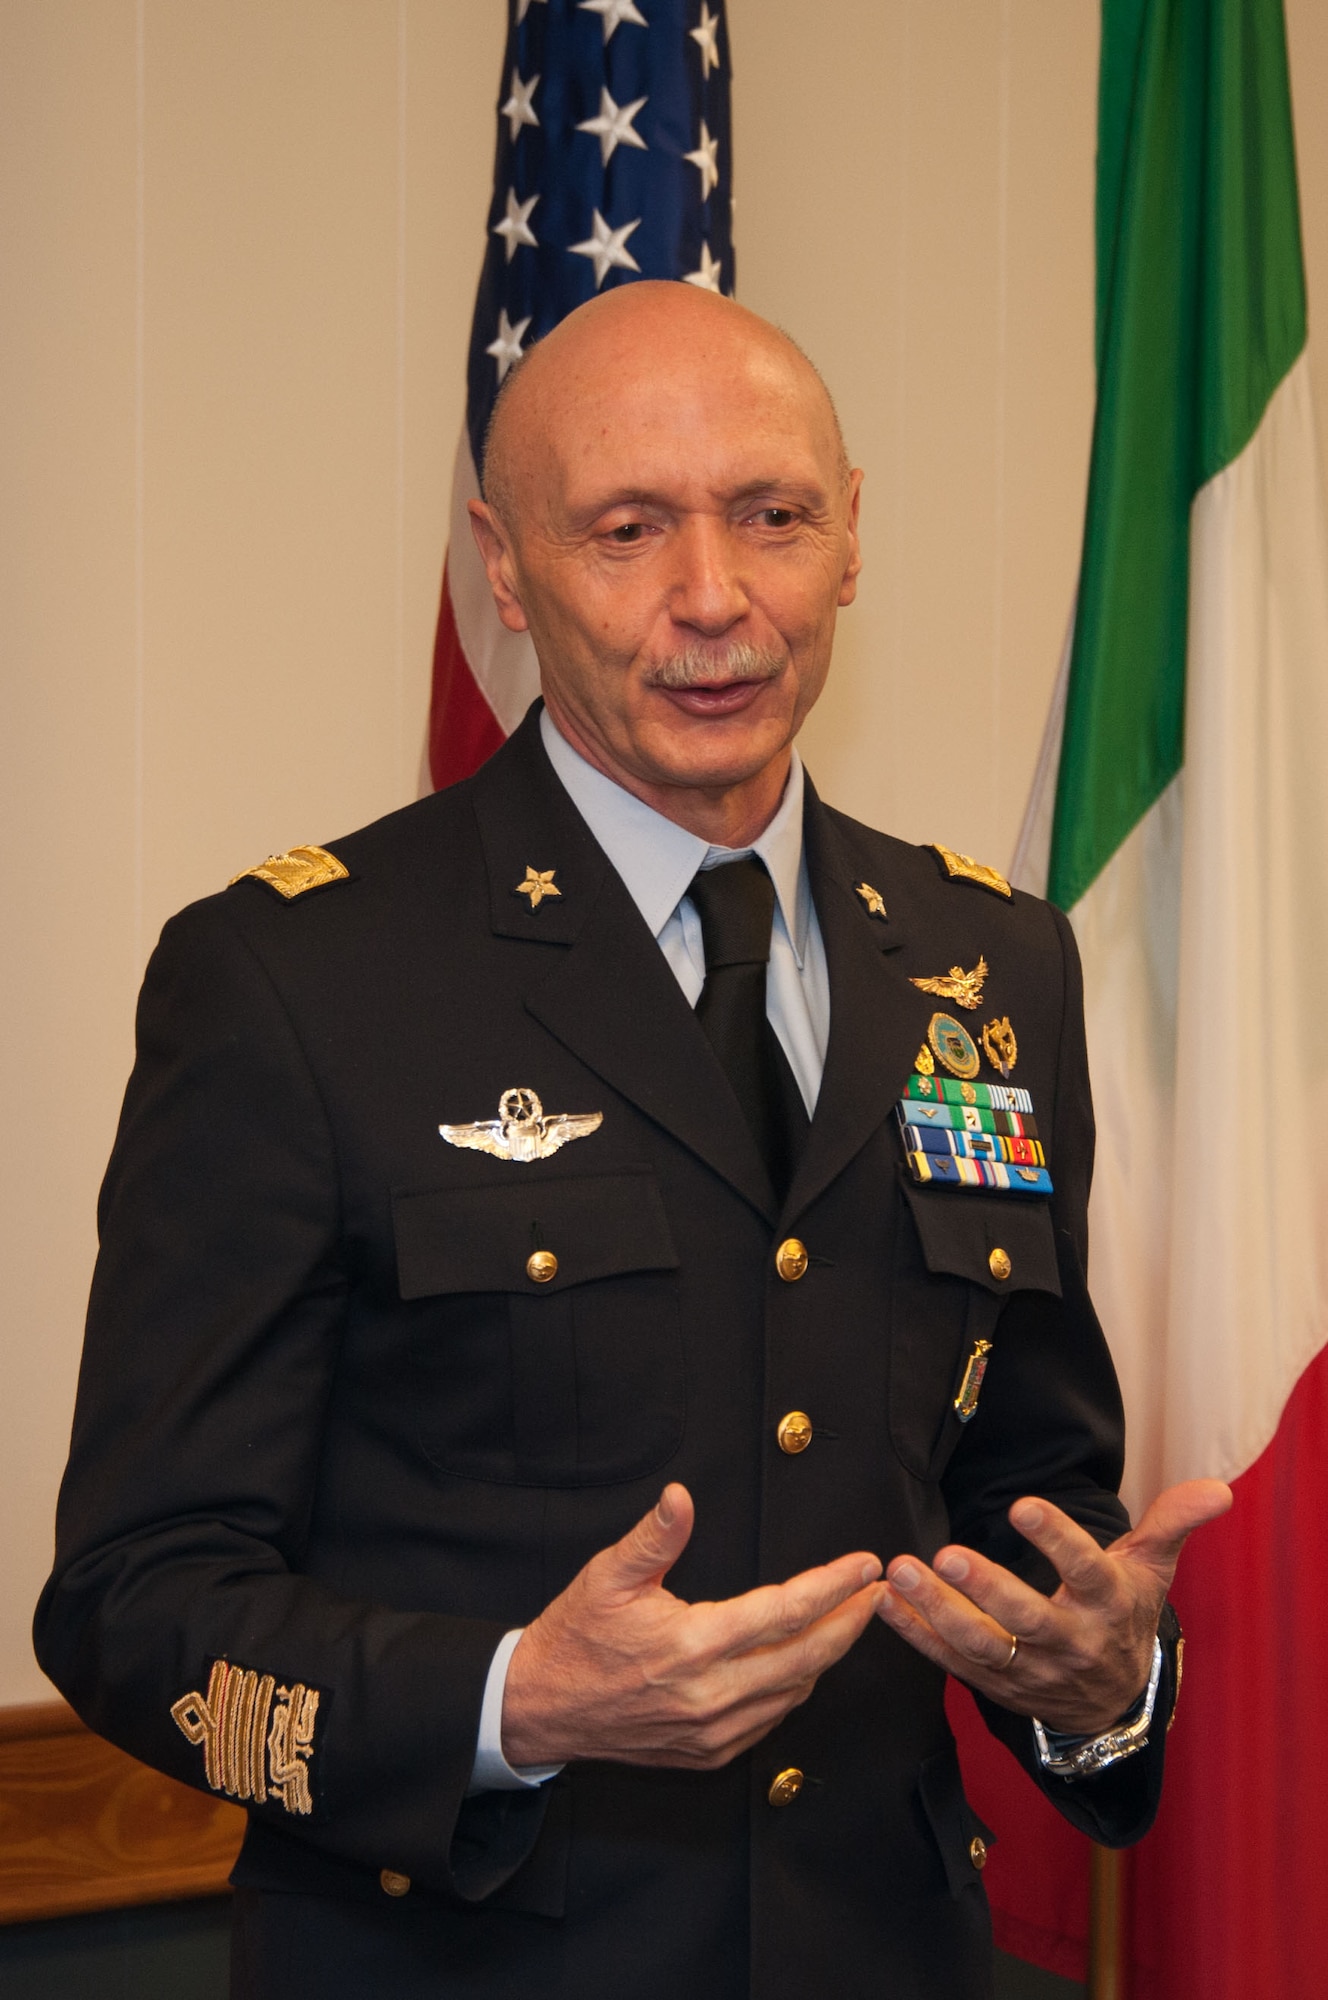 Lt. Gen. Enzo Vecciarelli, Chief of Staff of the Italian Air Force, speaks to attendees of the International Honor Roll Induction Ceremony during his inauguration into the IHR program on Maxwell Air Force Base, Ala., Feb. 10, 2017. More than 400 officers from 97 countries have been inducted as of 2017.  (US Air Force photo by Bud Hancock)